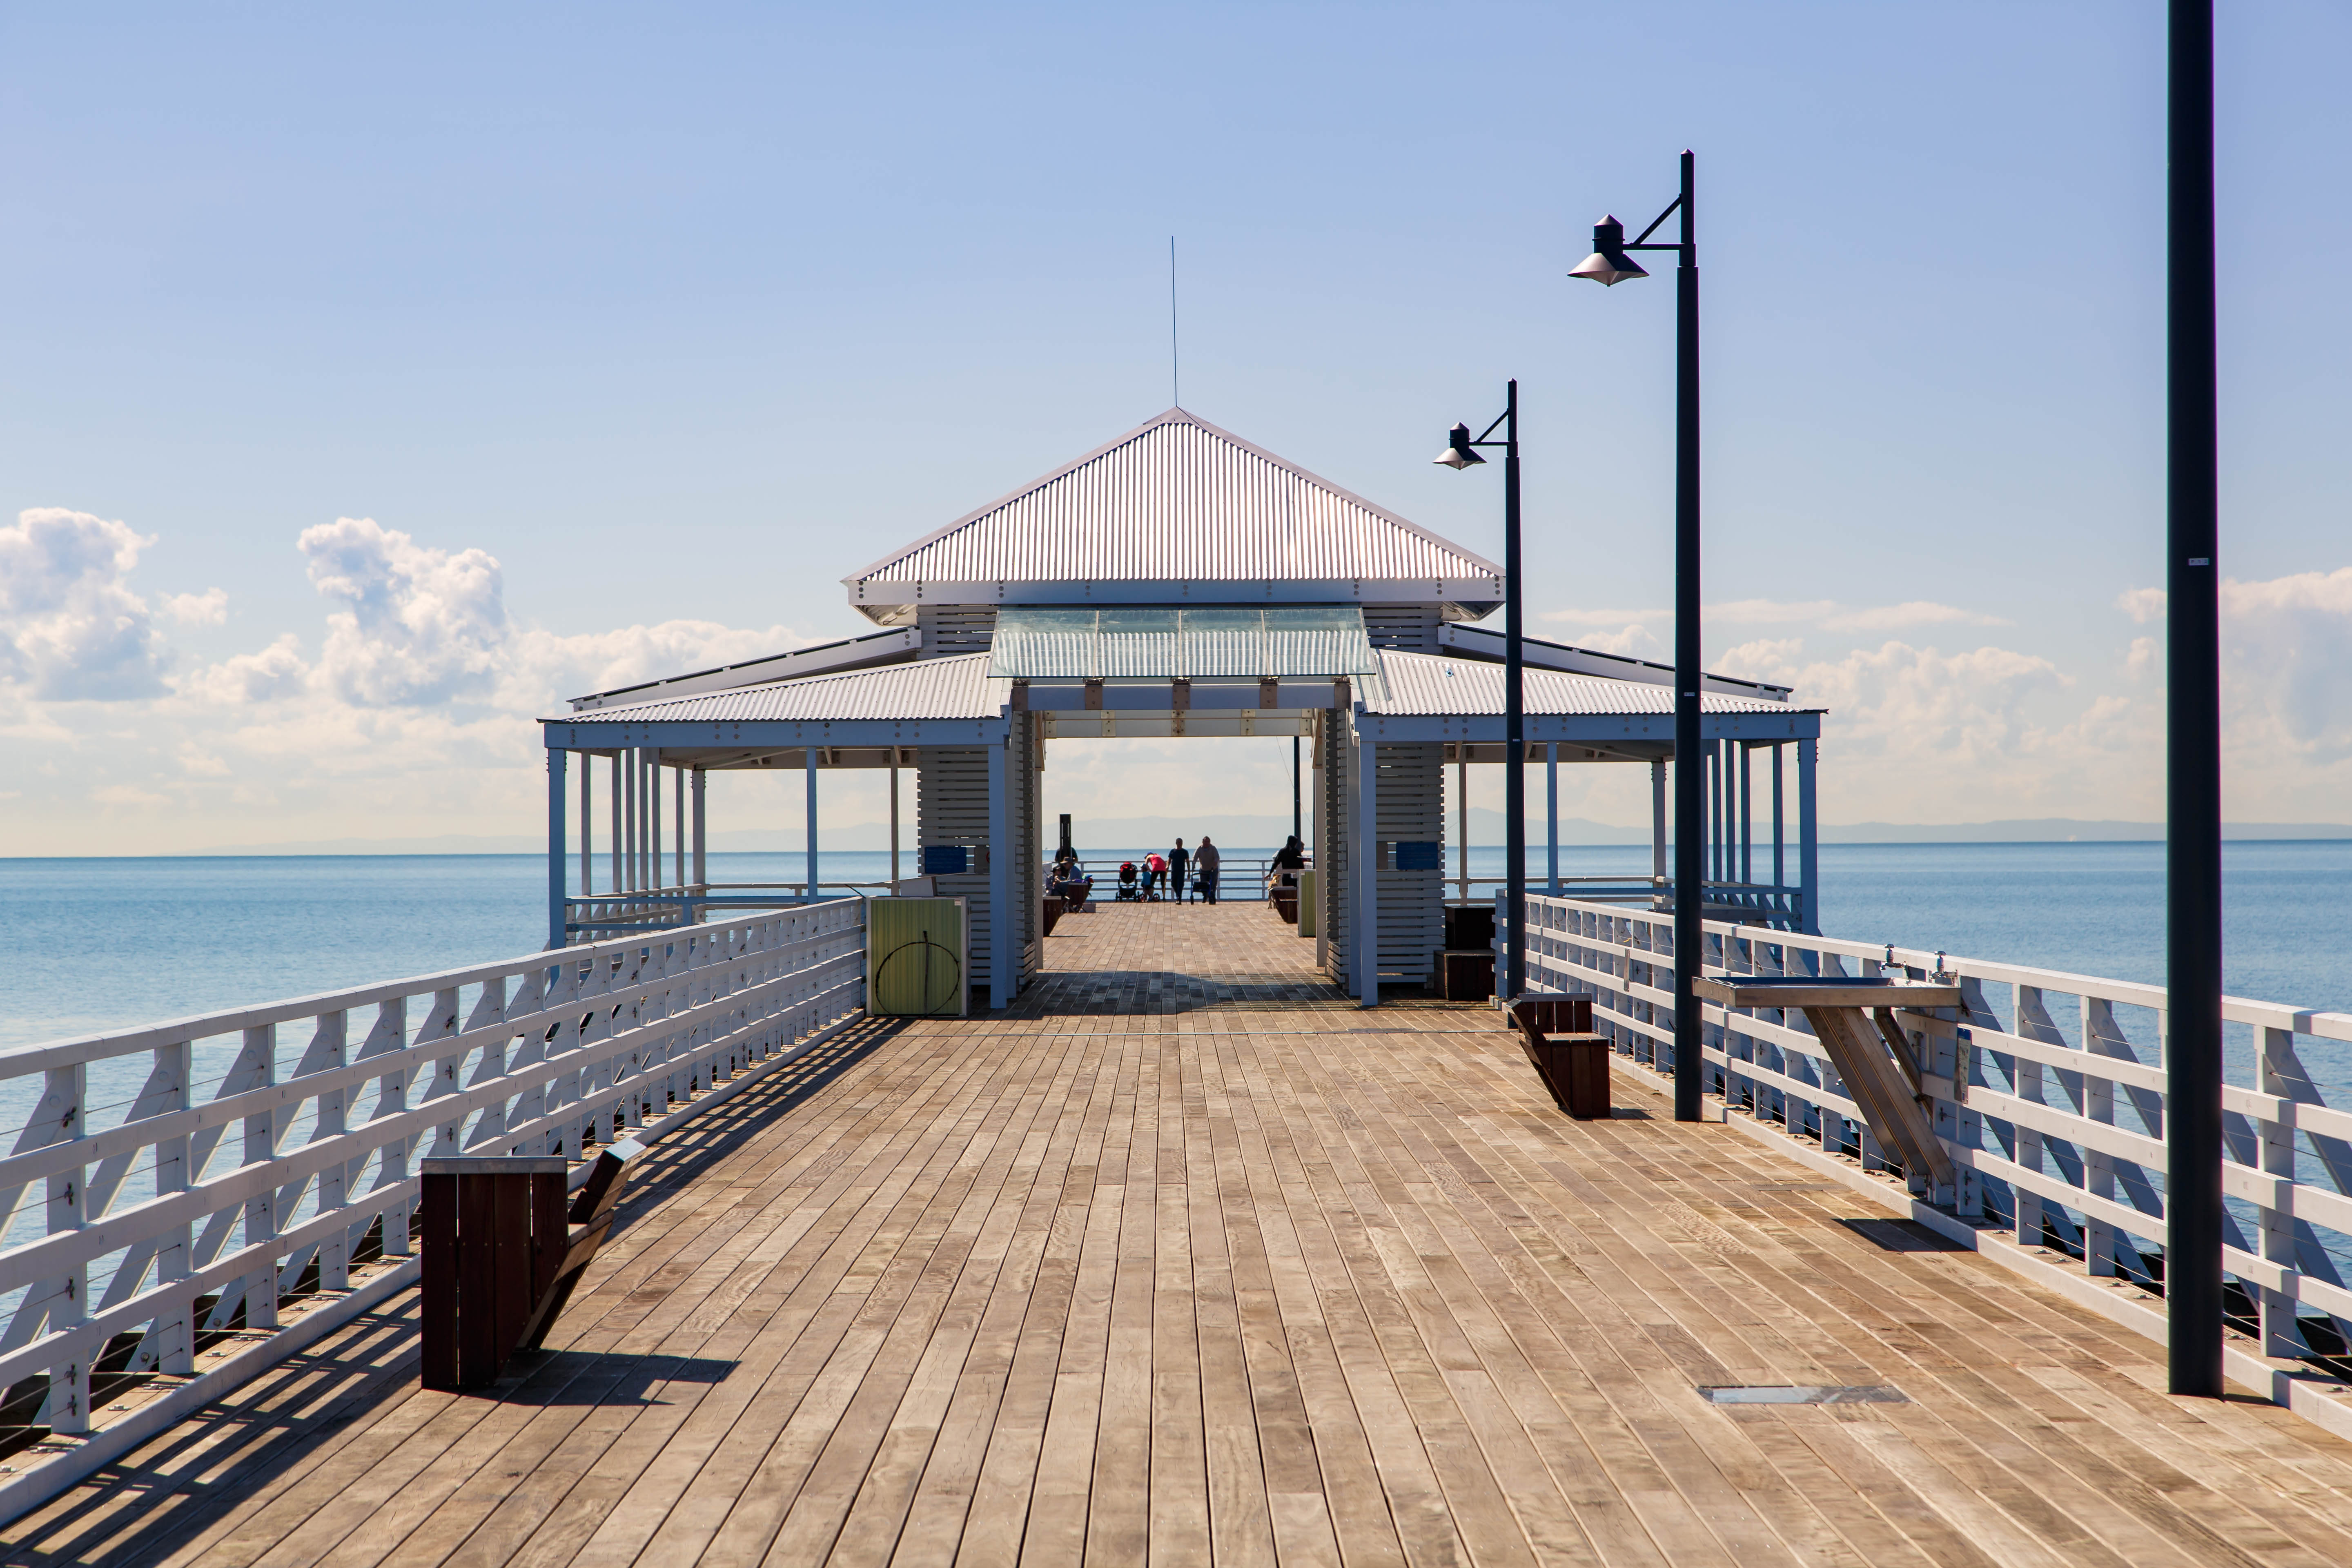 This is an image of the Shorncliffe Pier